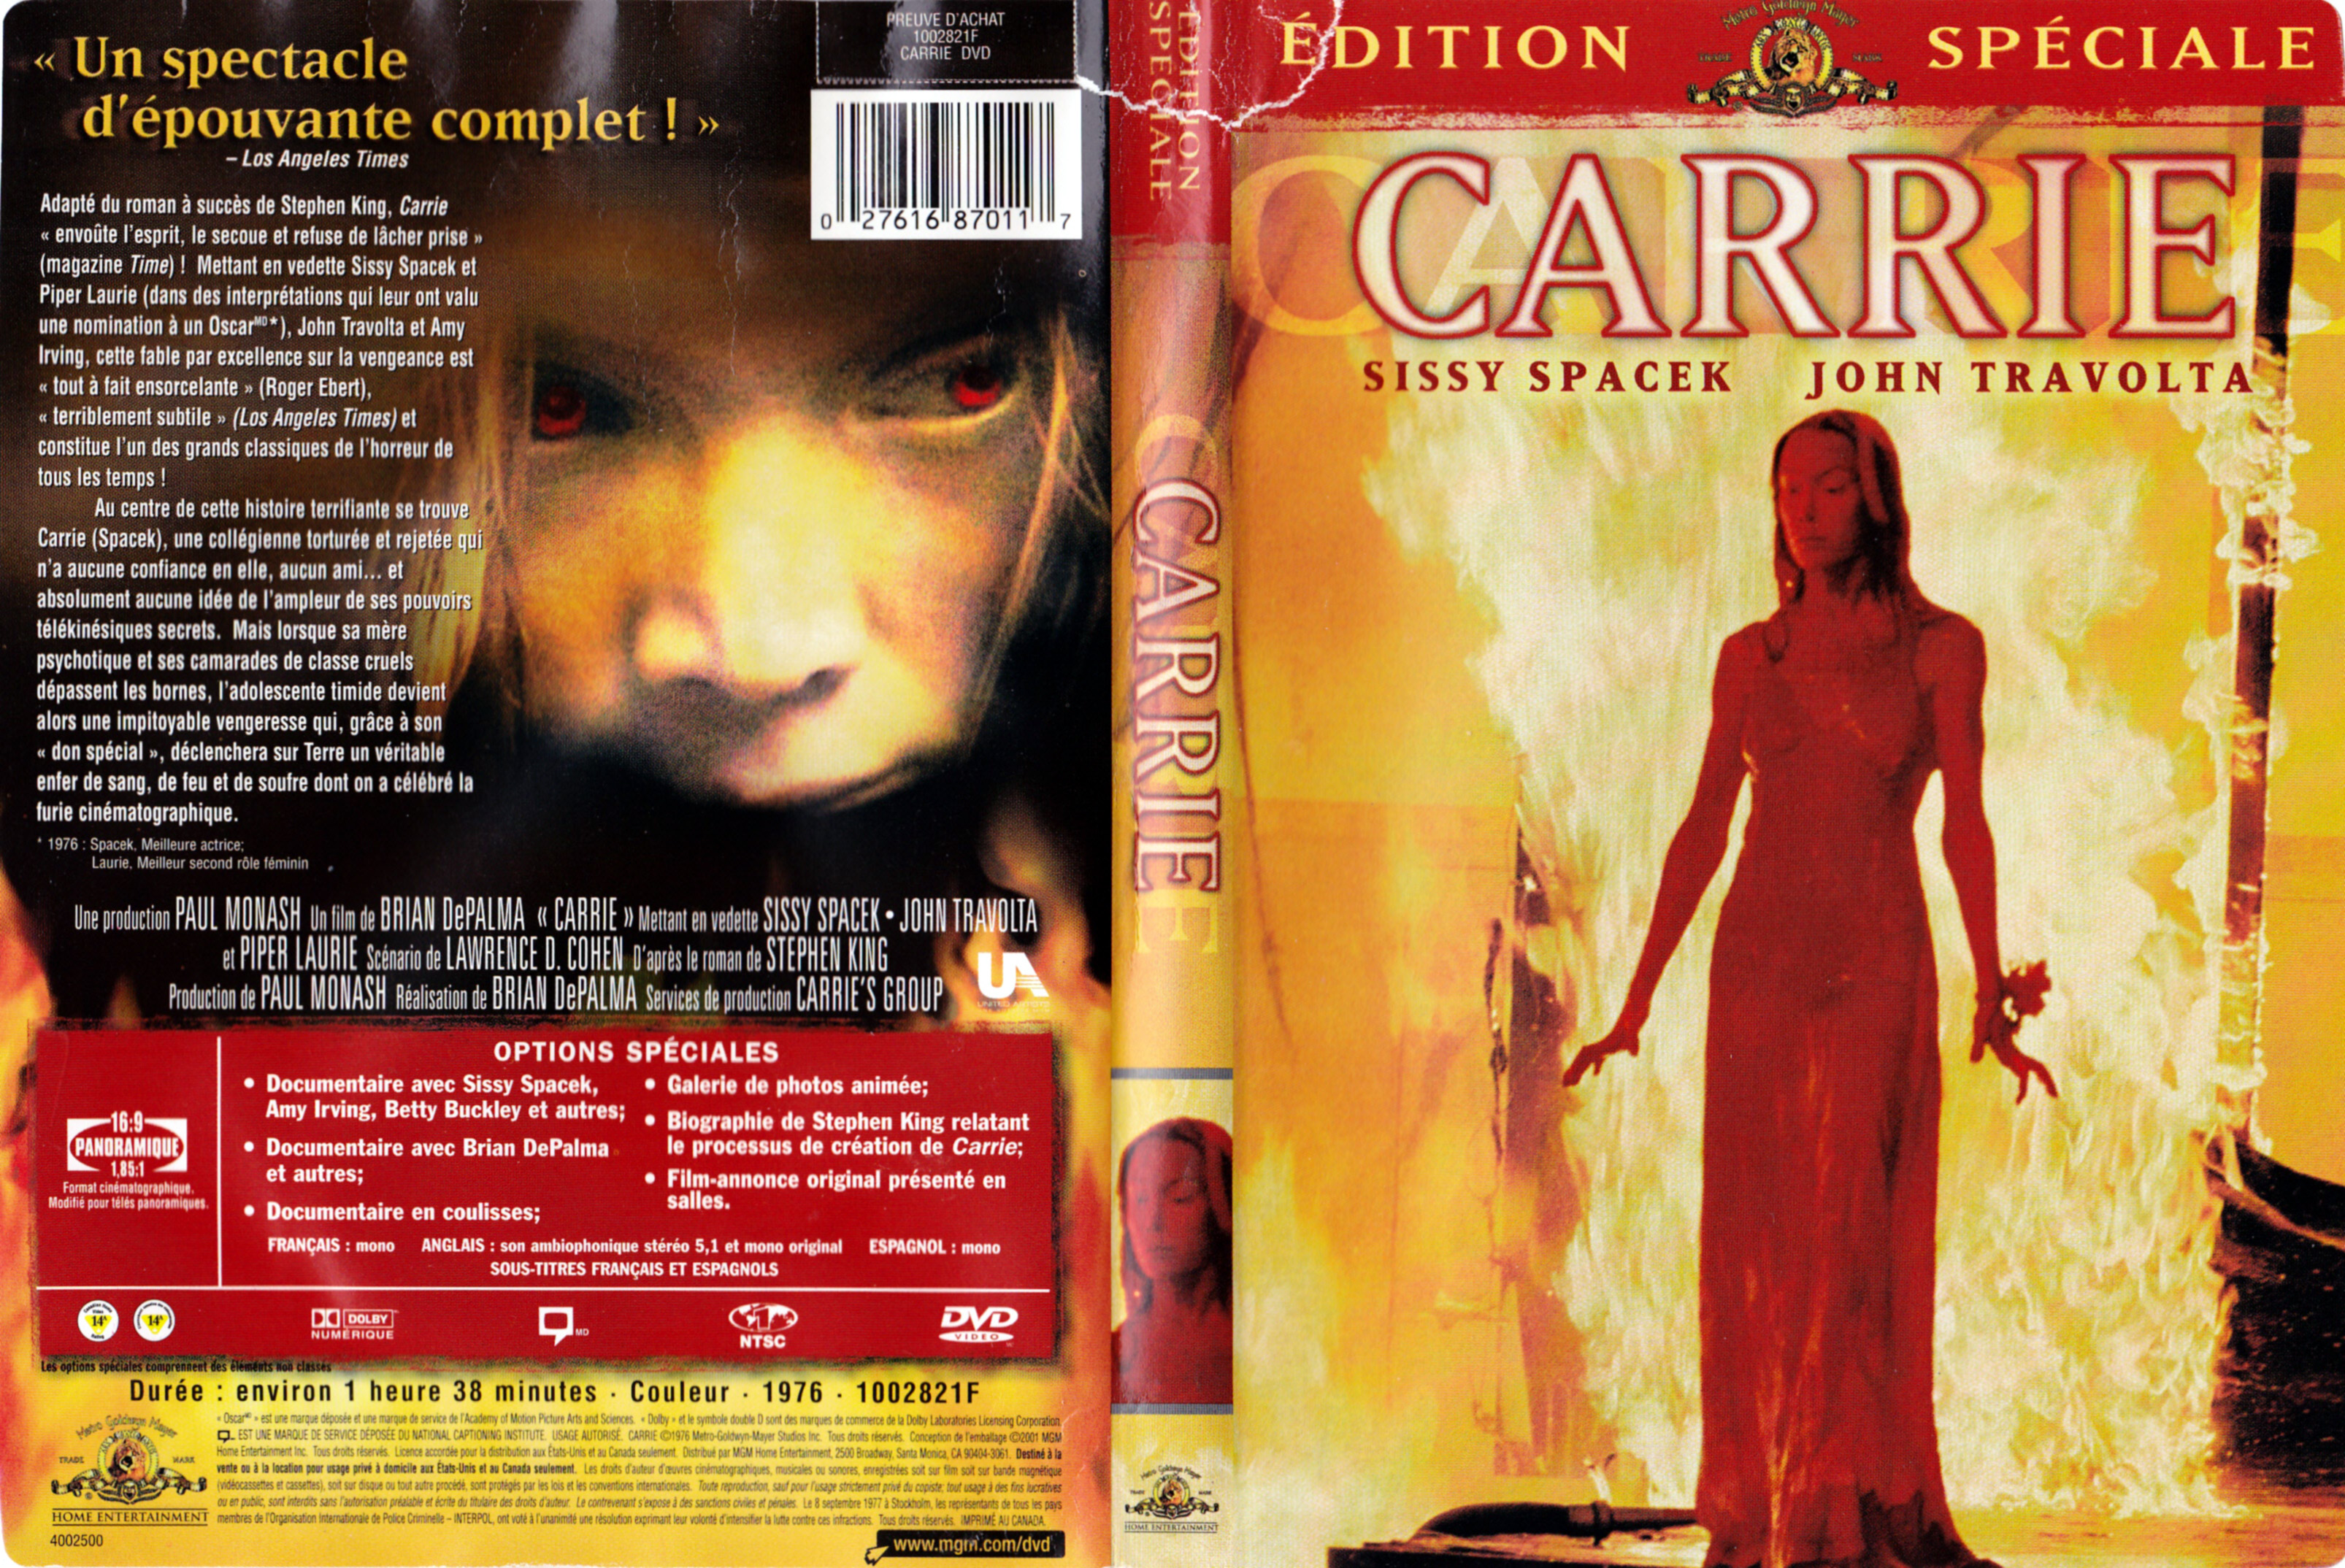 Jaquette DVD Carrie (Canadienne)